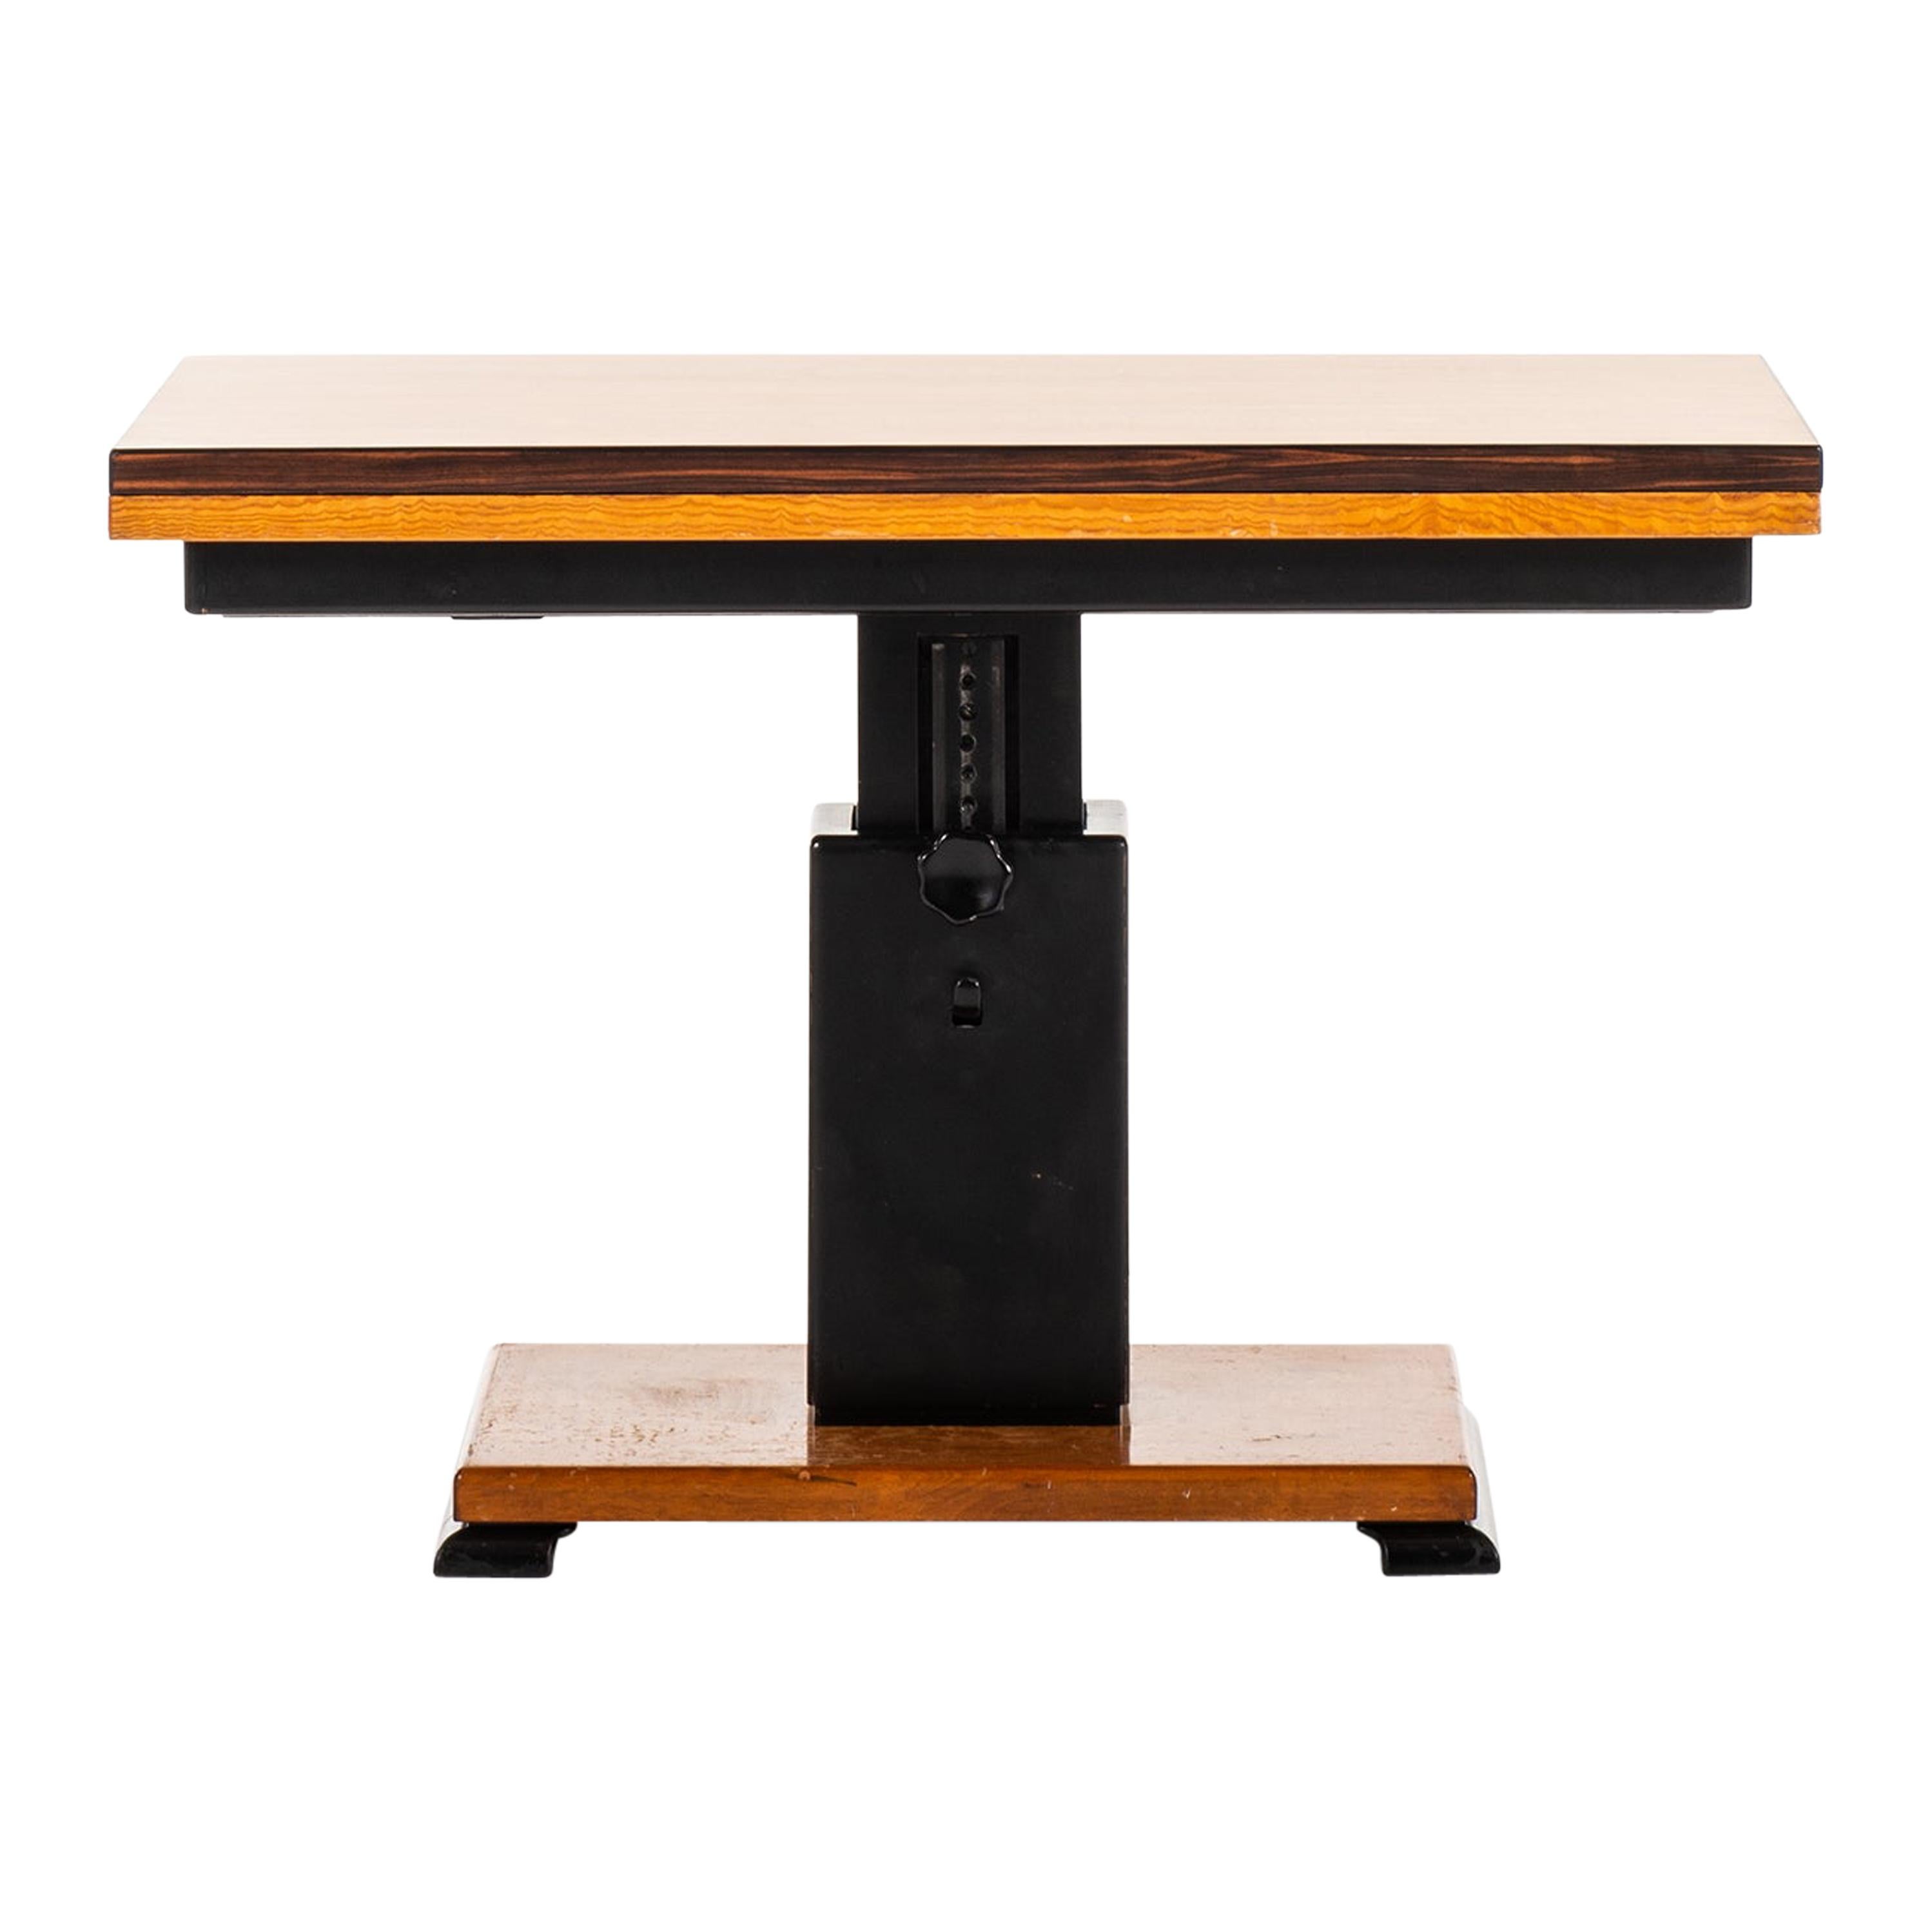 Otto & Bo Wretling Table Model Ideal Produced by Otto Wretling in Sweden For Sale